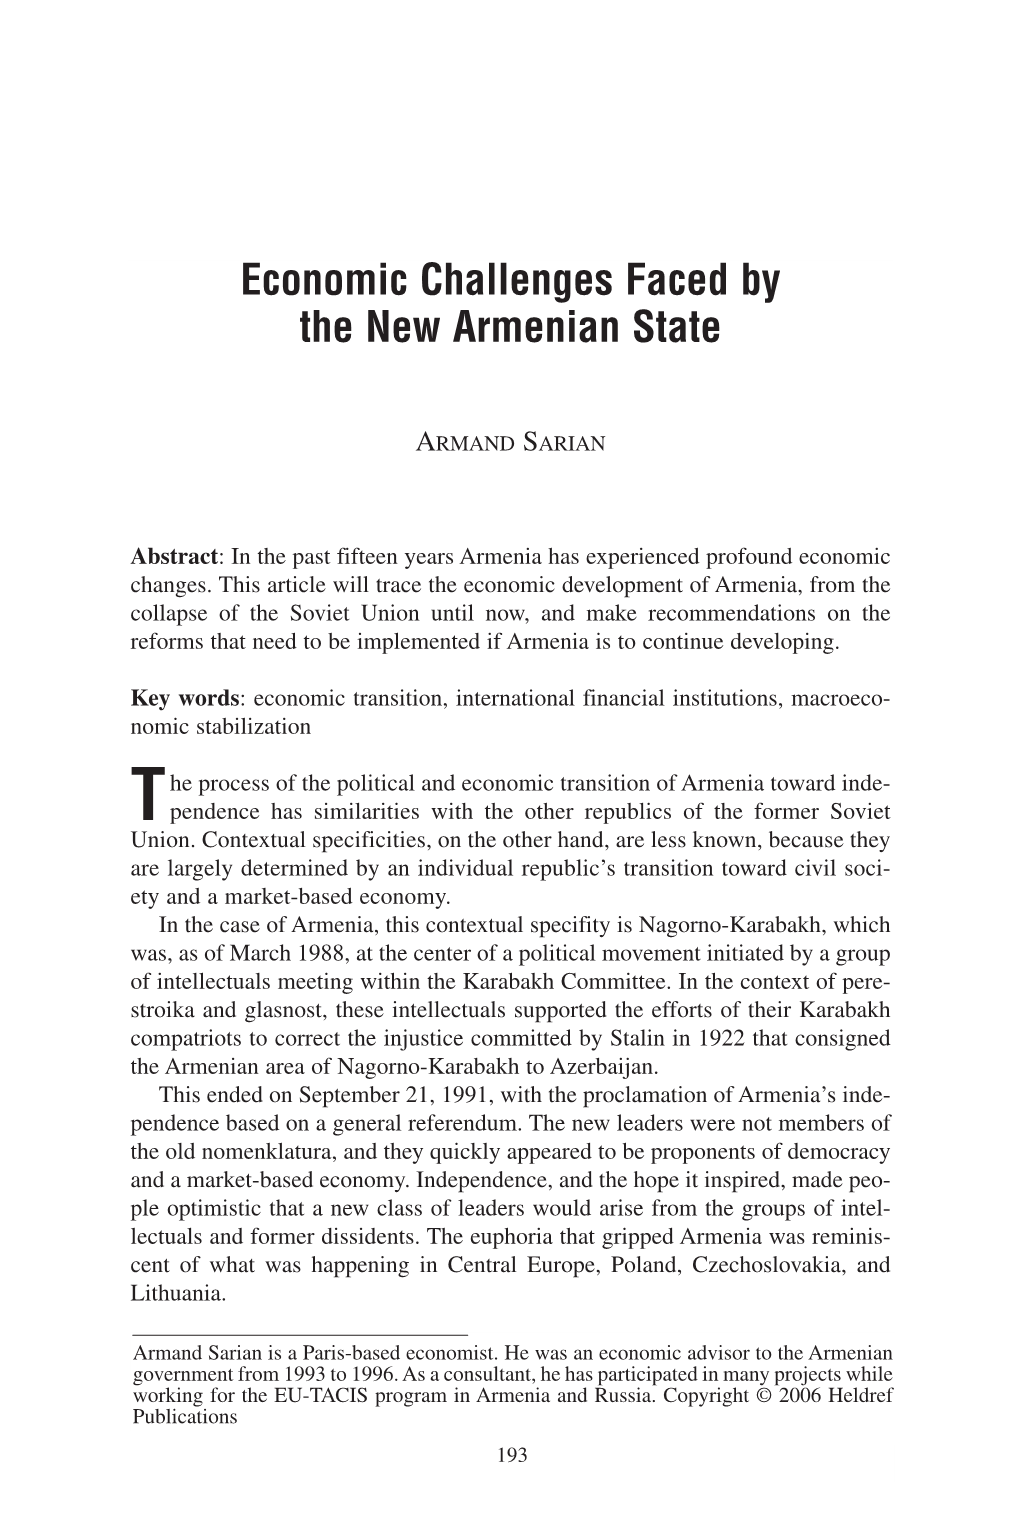 Economic Challenges Faced by the New Armenian State